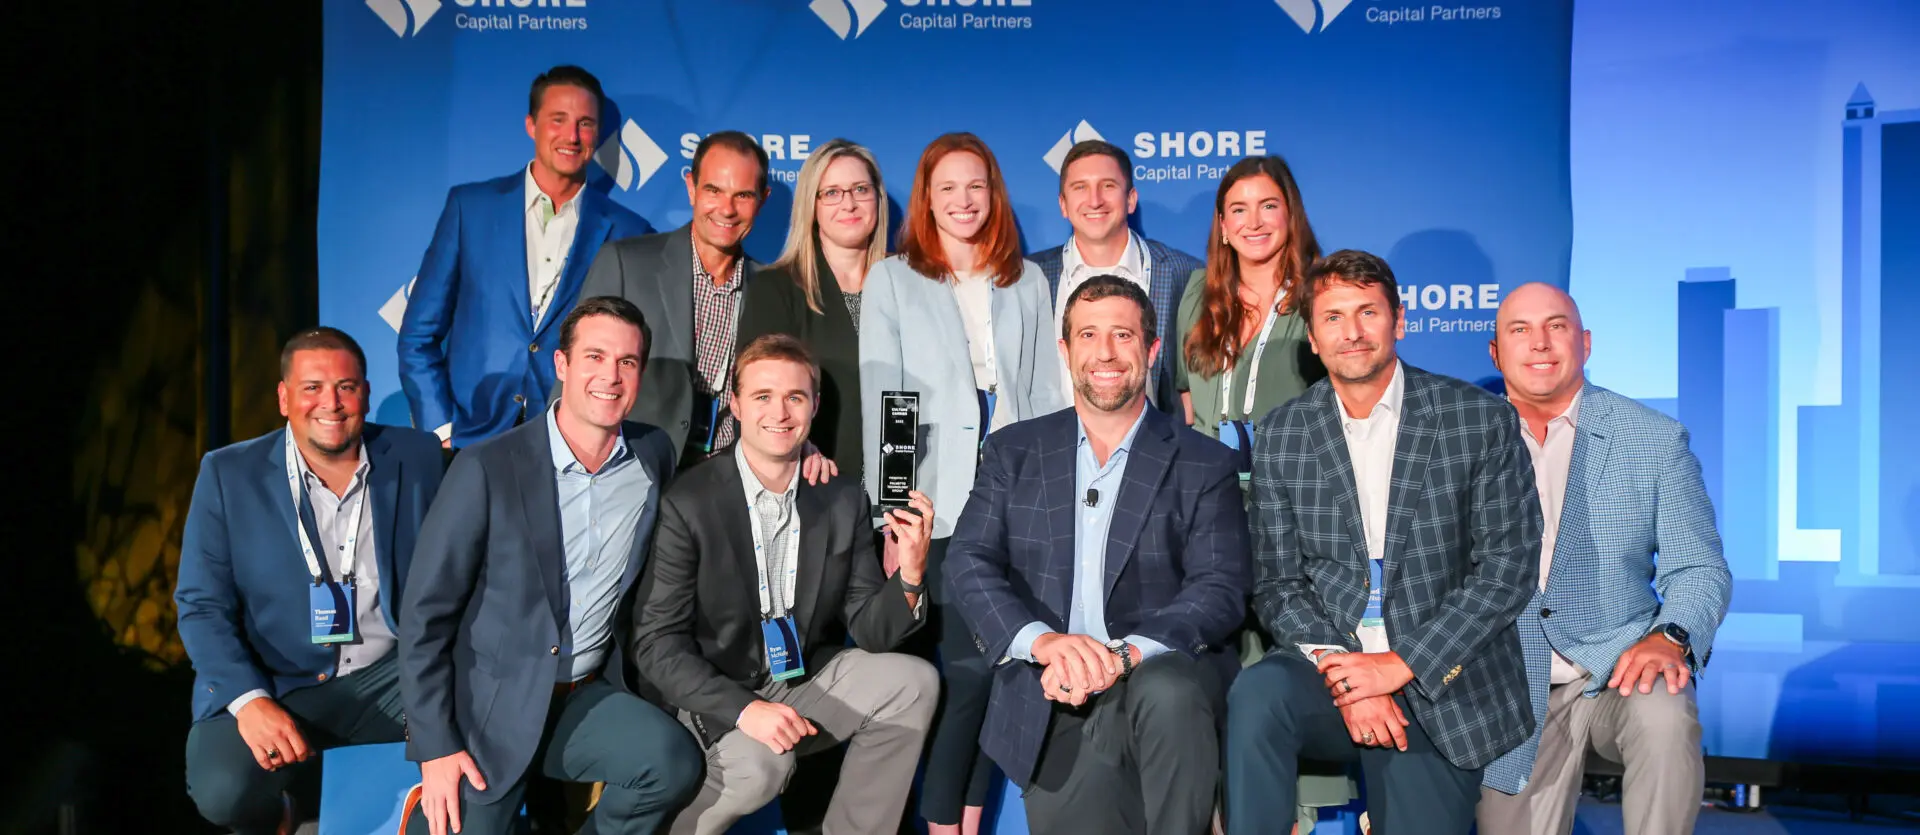 Operating Partner Team Poses for Award Photo with Justin Ishbia at Shore Capital Partners Executive Leadership Academy event